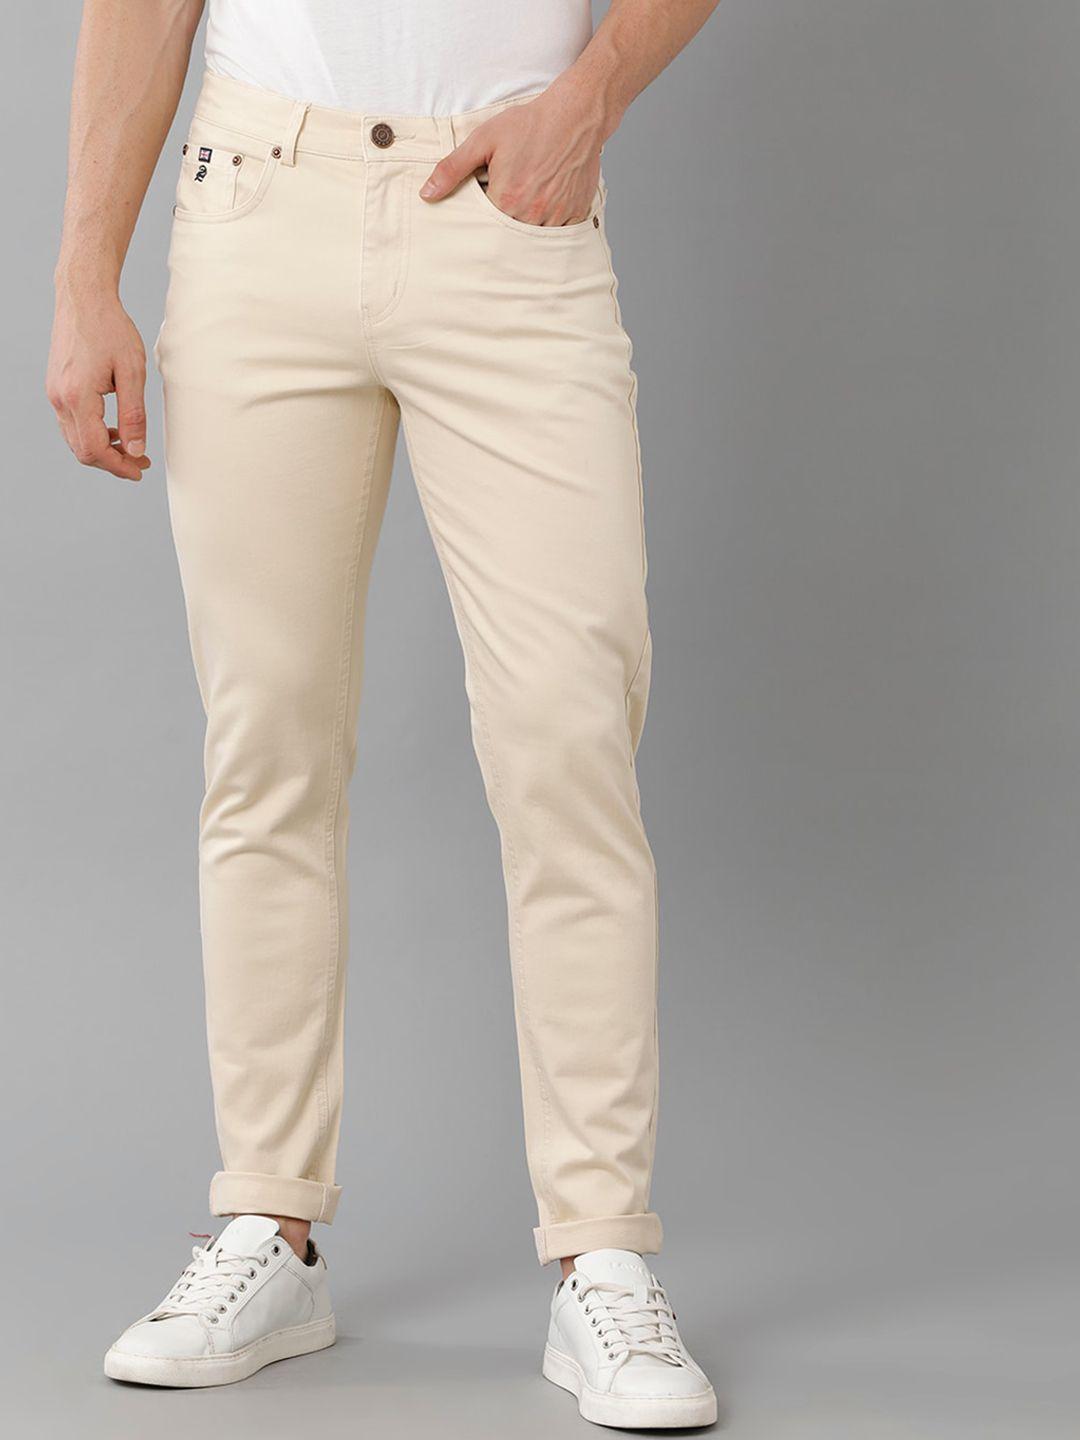 double two men mid-rise smart slim fit chinos trousers